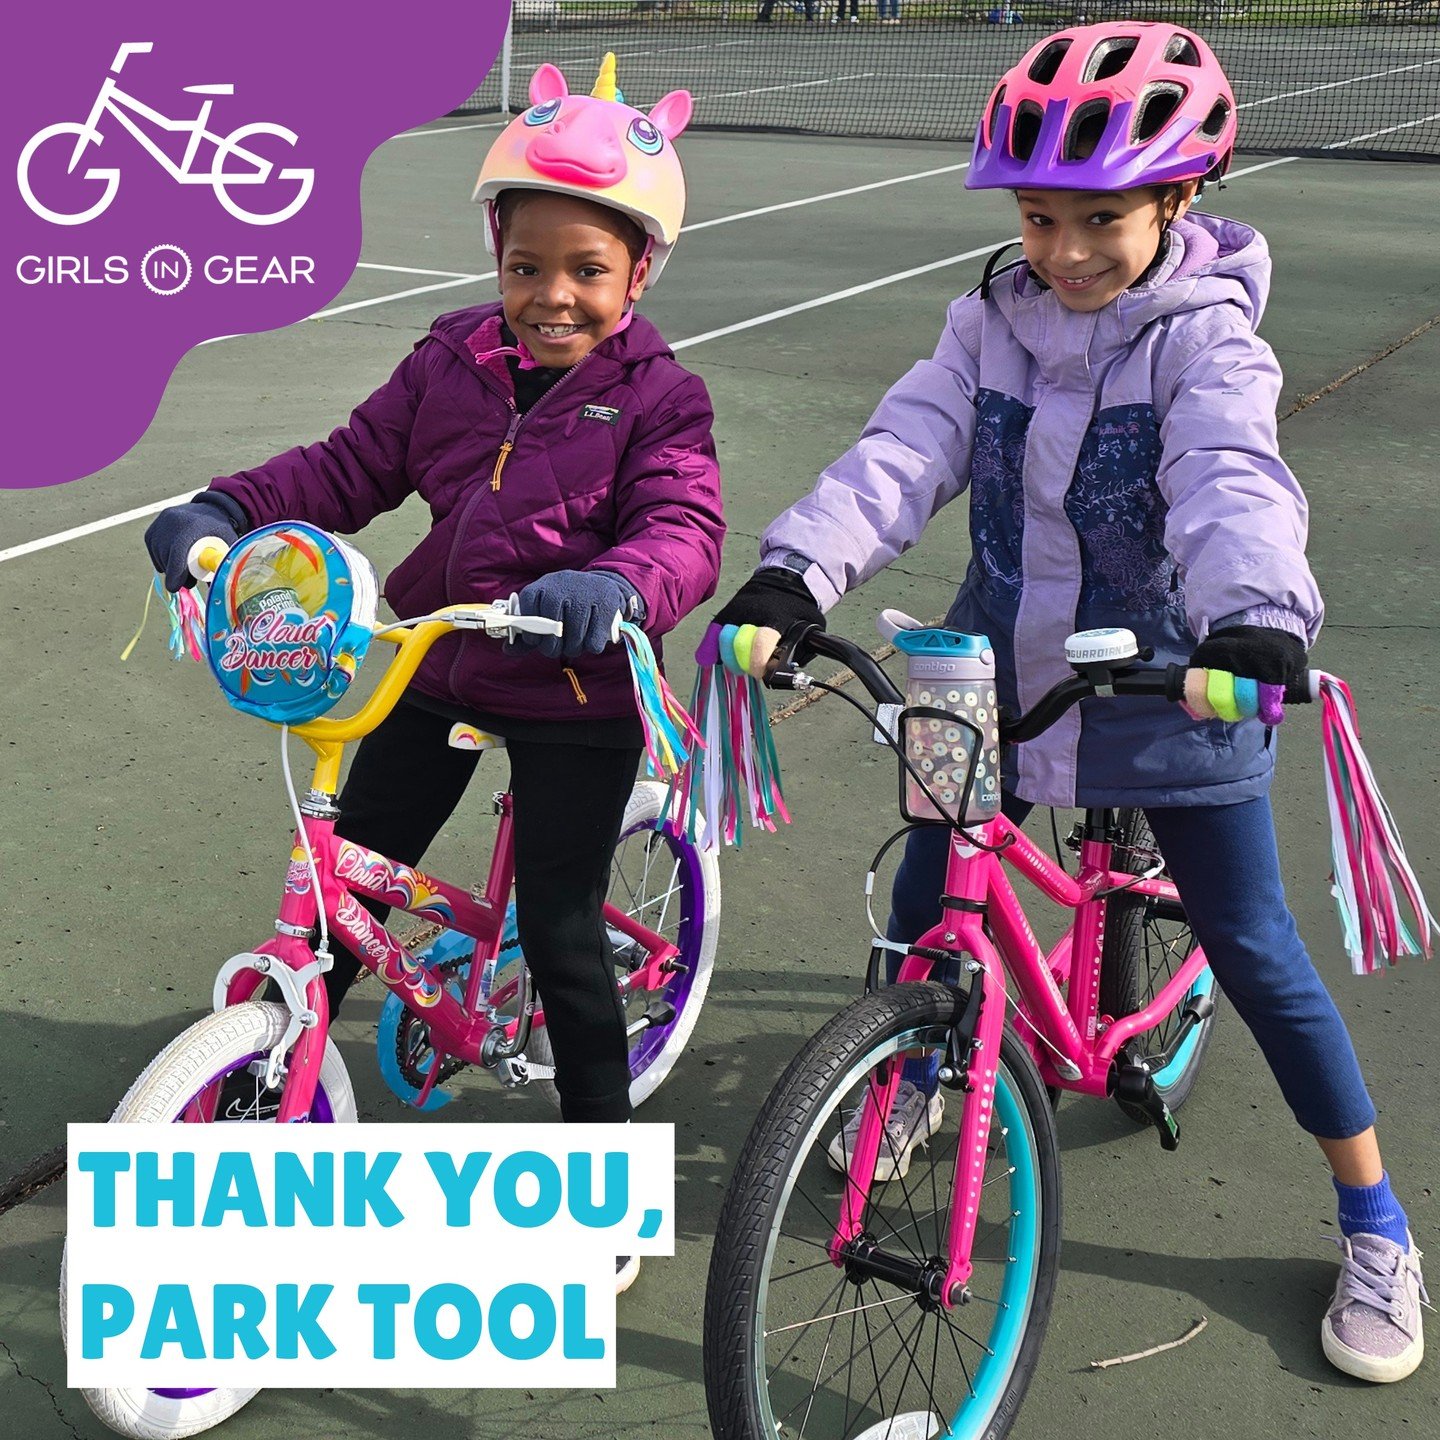 Gratitude is in full gear for @parktoolblue! Your support is helping us change lives, one girl at a time.